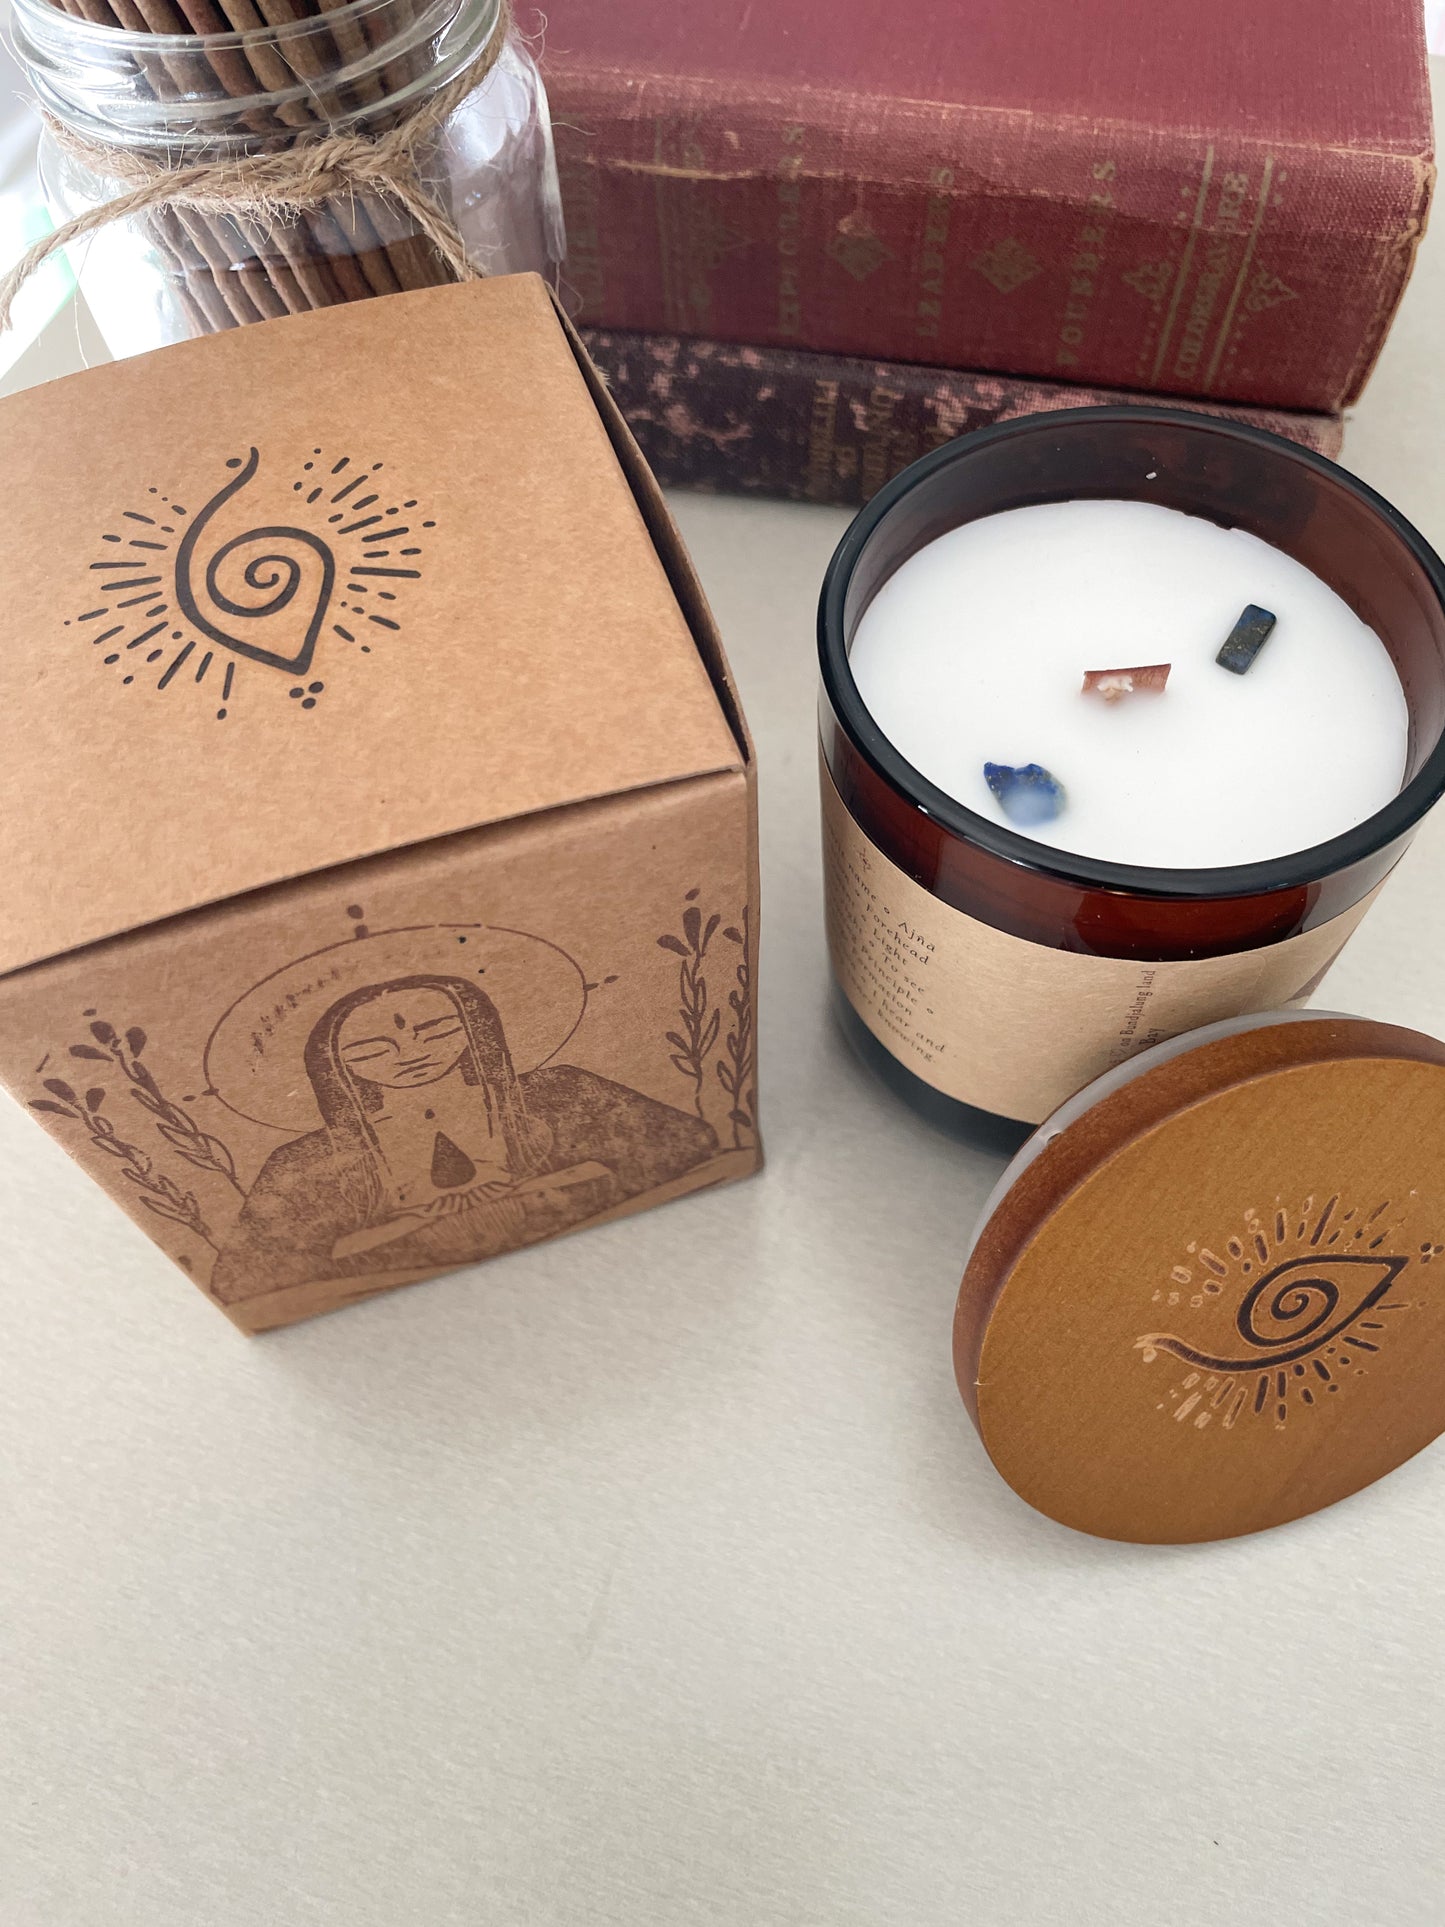 Third Eeye Chakra meditation candle with crystals styled with candle packaging, spiritual books and incense